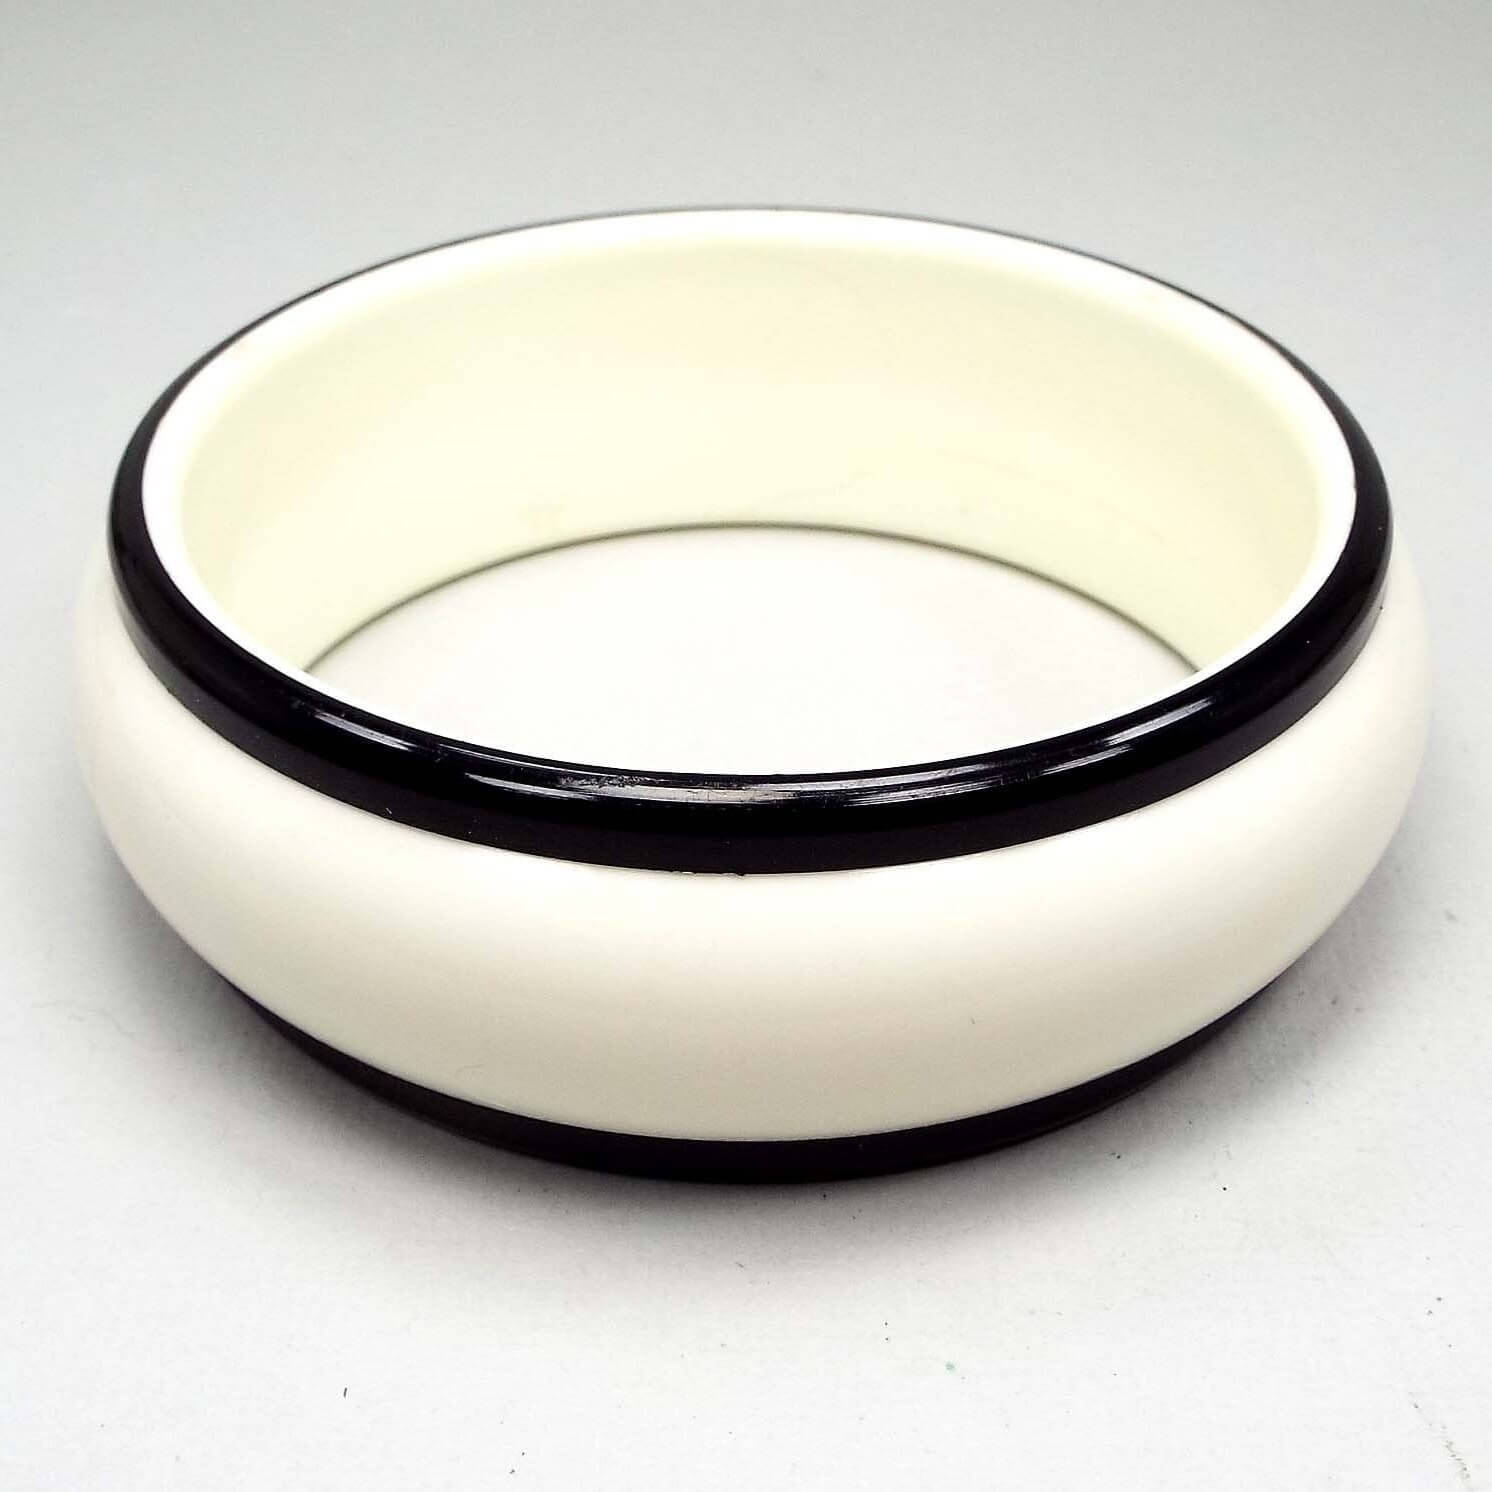 Side view of the Mid Century vintage bangle bracelet. The bangle has a wide design with white plastic and a black plastic trim on each side. It is a round shaped bangle.